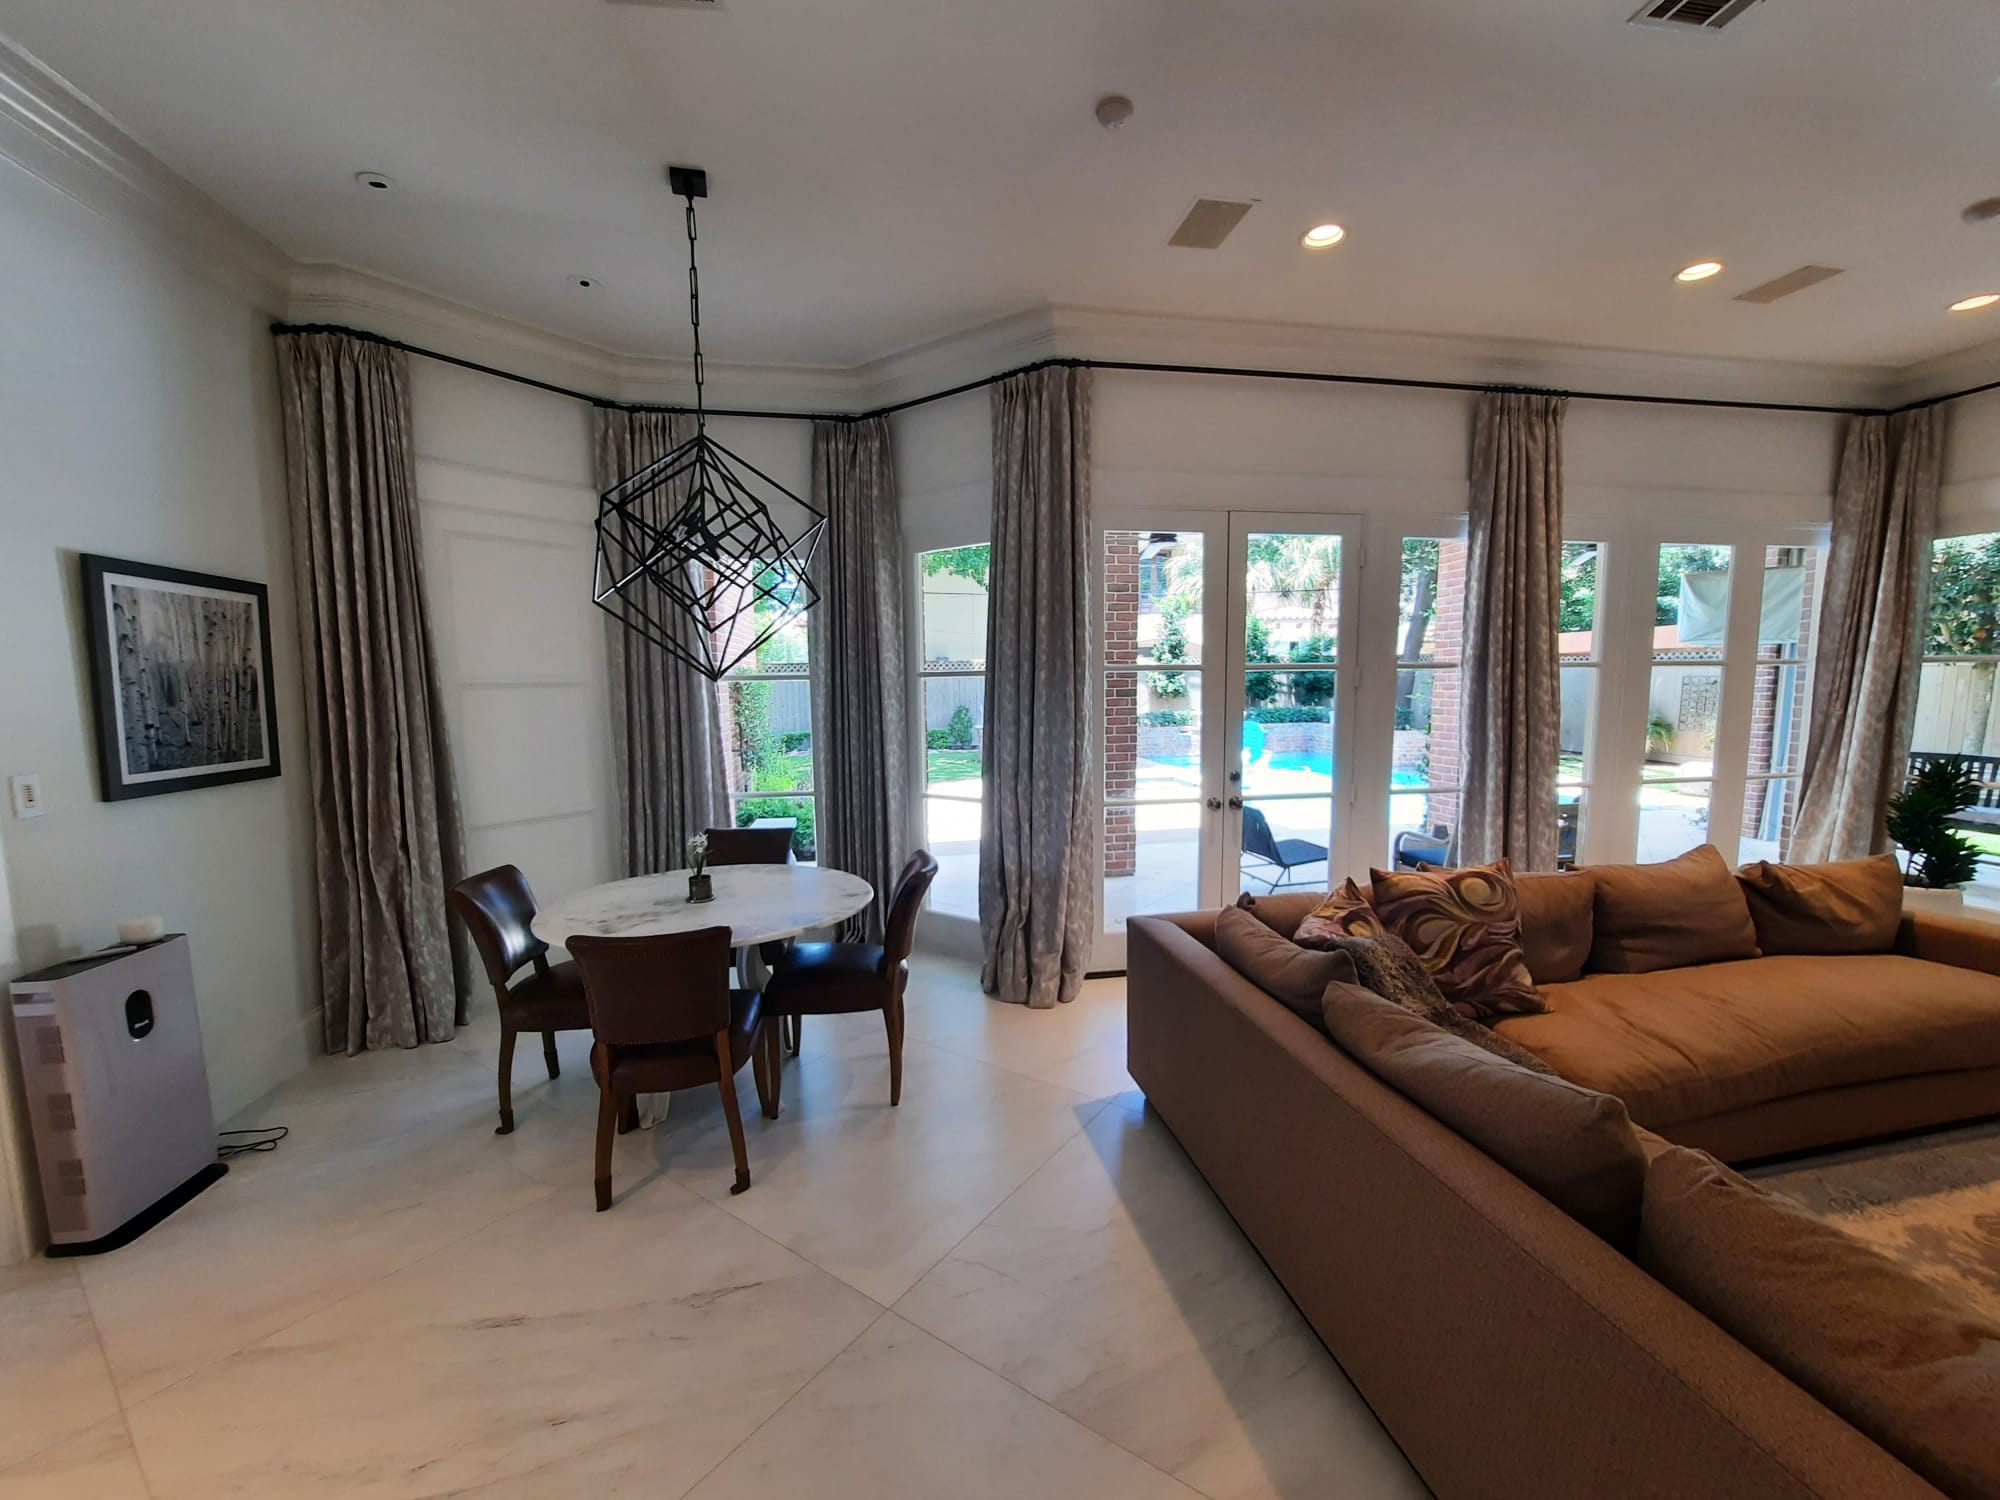 Just installed some beautiful Custom Drapery Panels from Horizons in Allegra Silver fabric. Updated with Crown / French pleats and iron rod /rings to compliment the clients elegant, modern home.